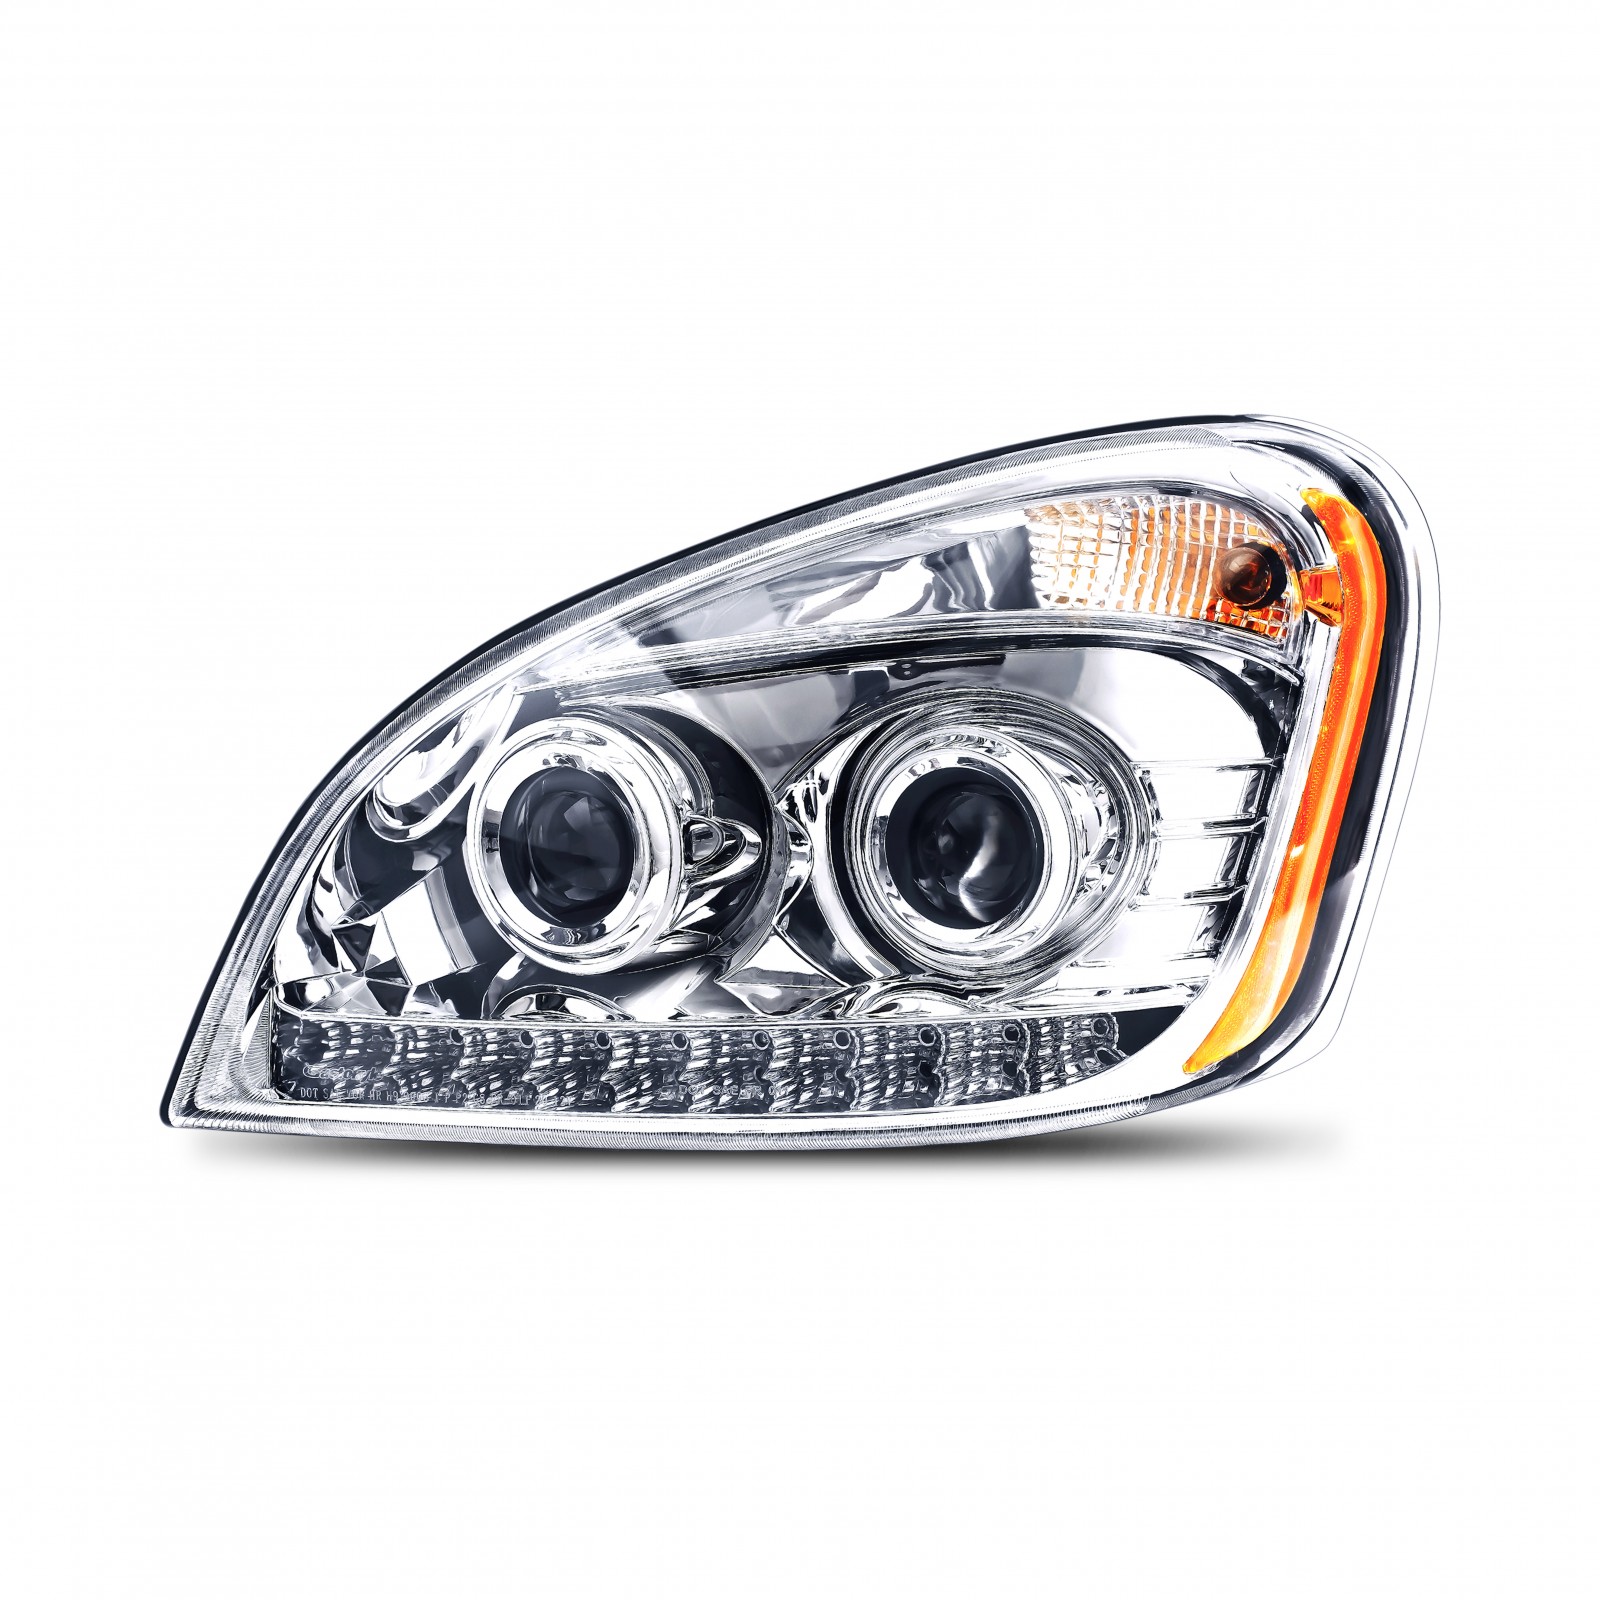 Headlight Assembly for 2008-2018 Freightliner Cascadia with Halogen H&L Beam